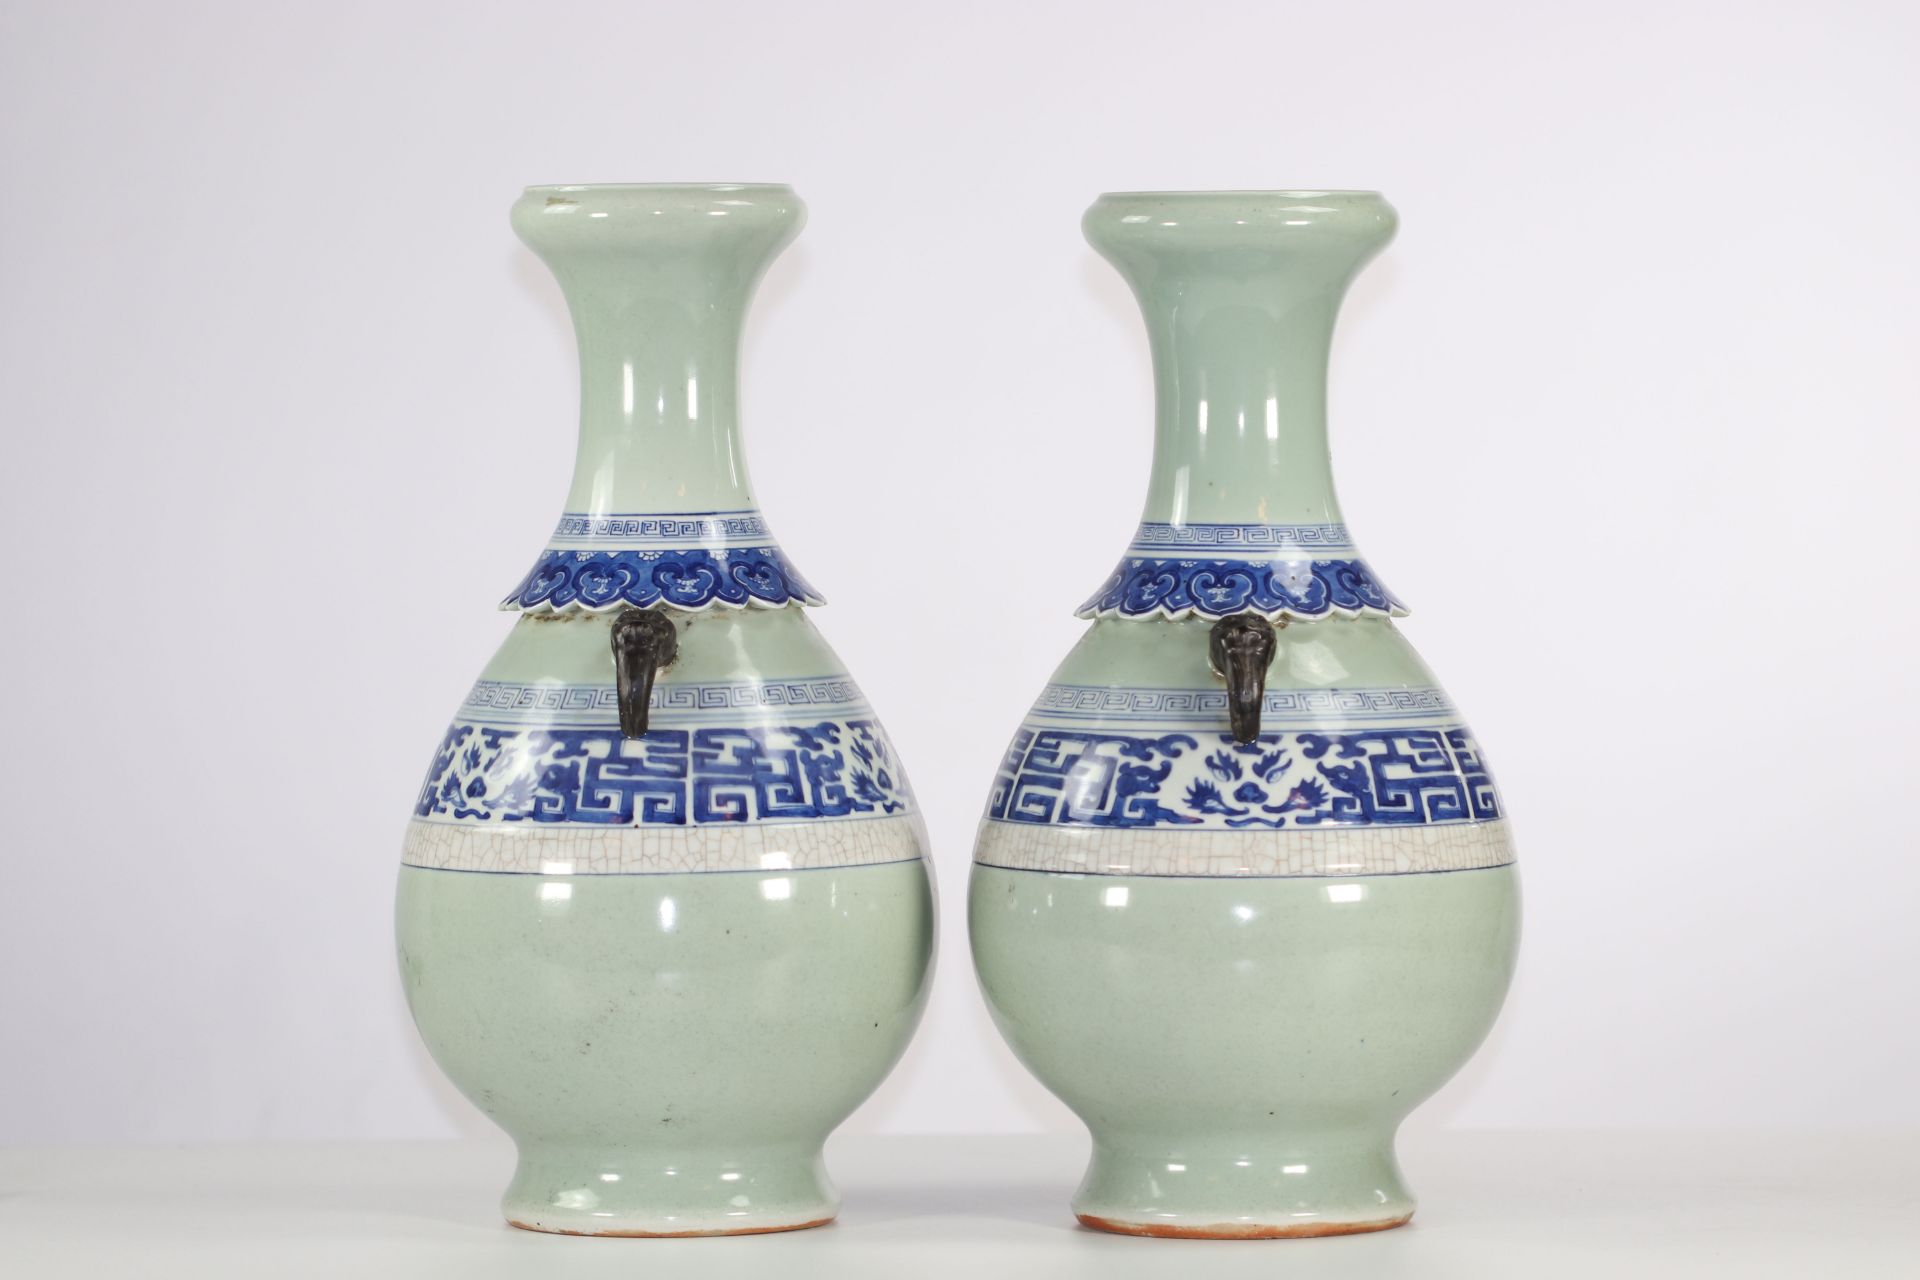 Pair of Nanjing porcelain vases, late 19th century China. - Image 2 of 6